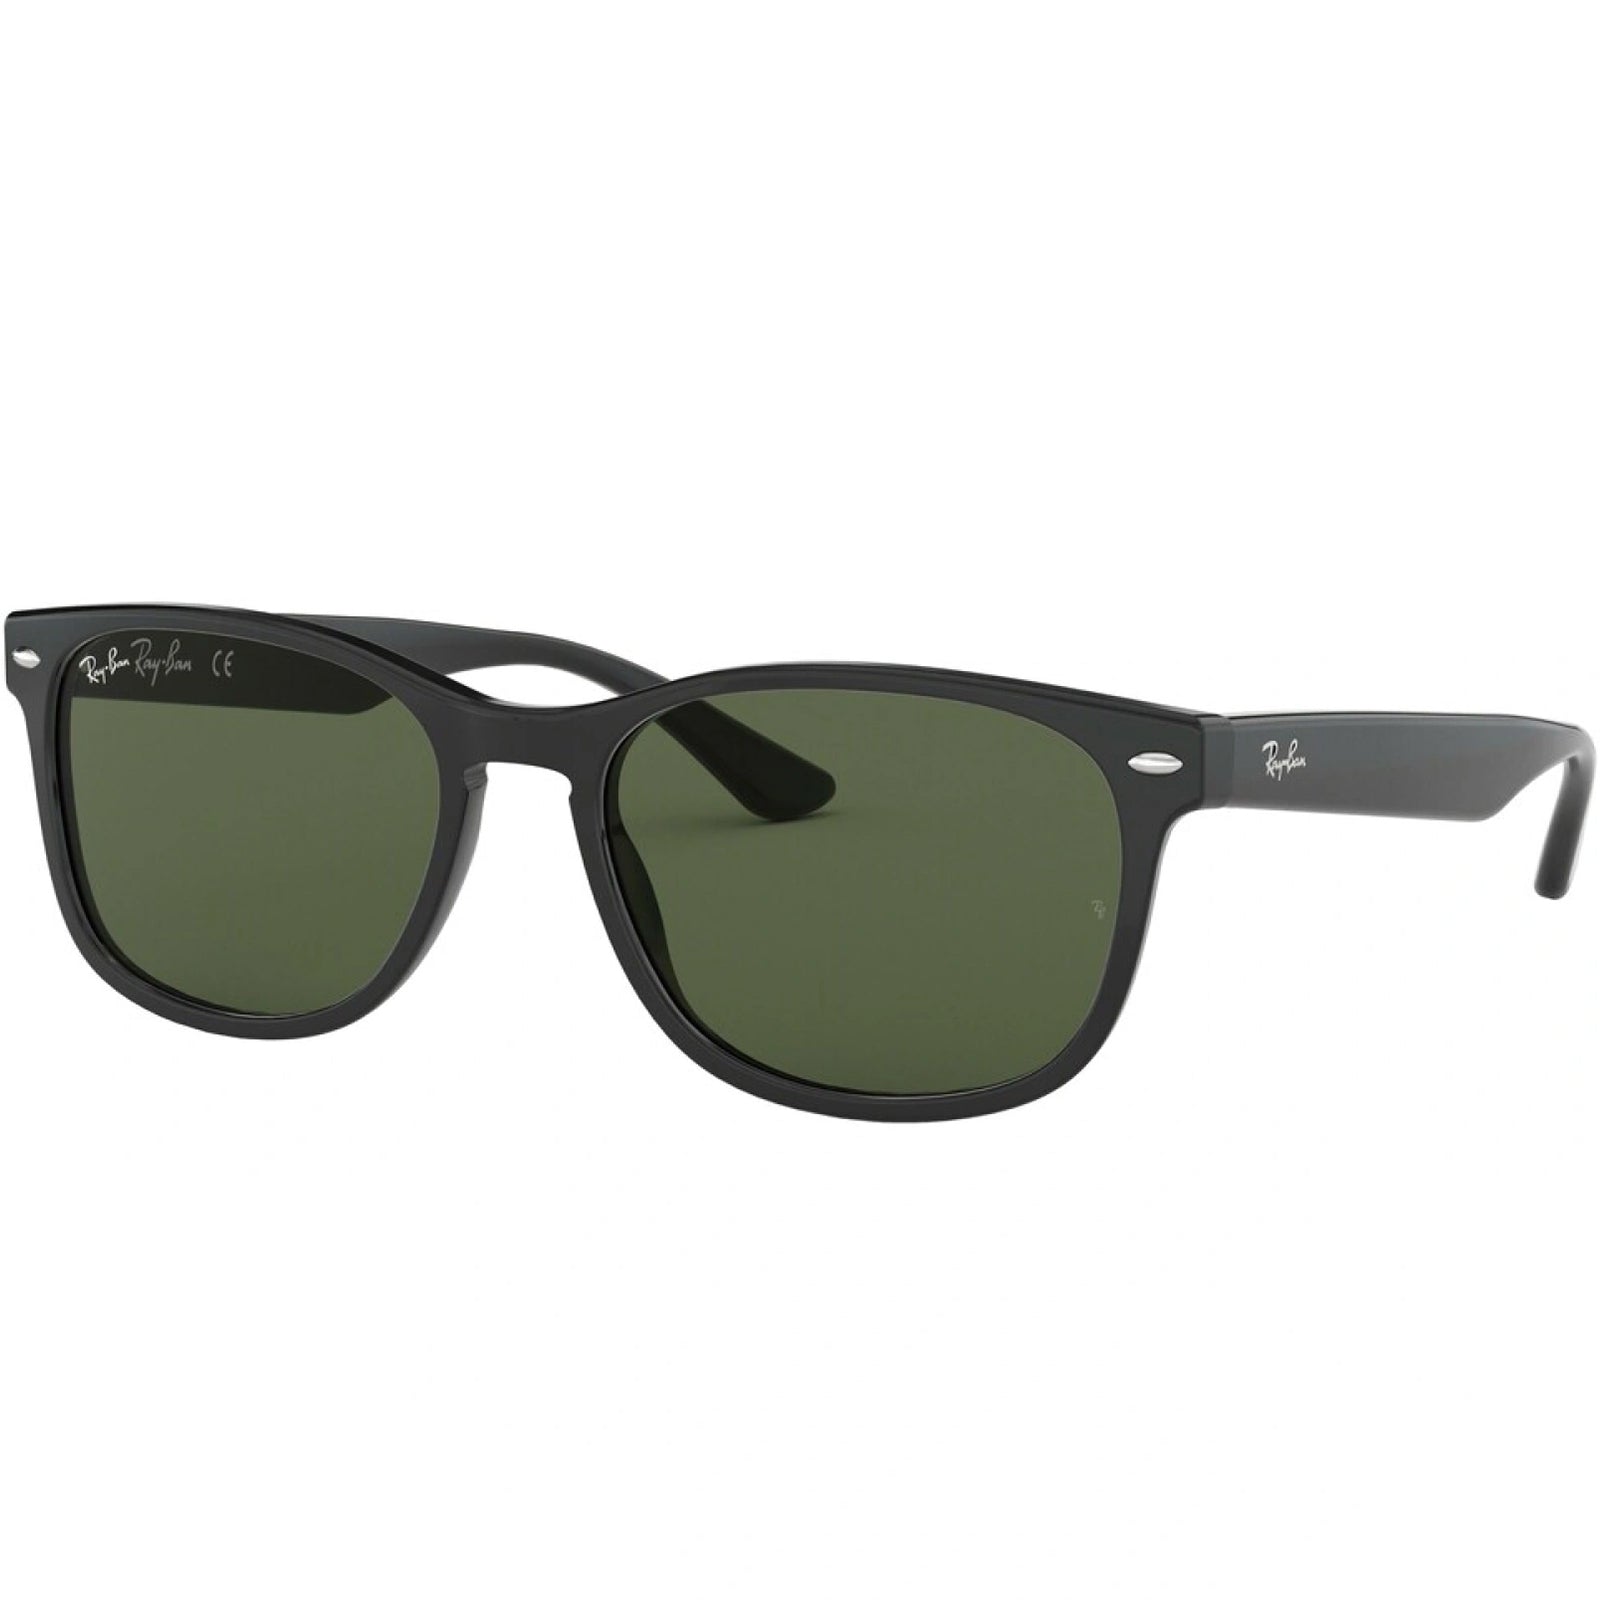 Ray-Ban RB2184 Adult Lifestyle Sunglasses-0RB2184